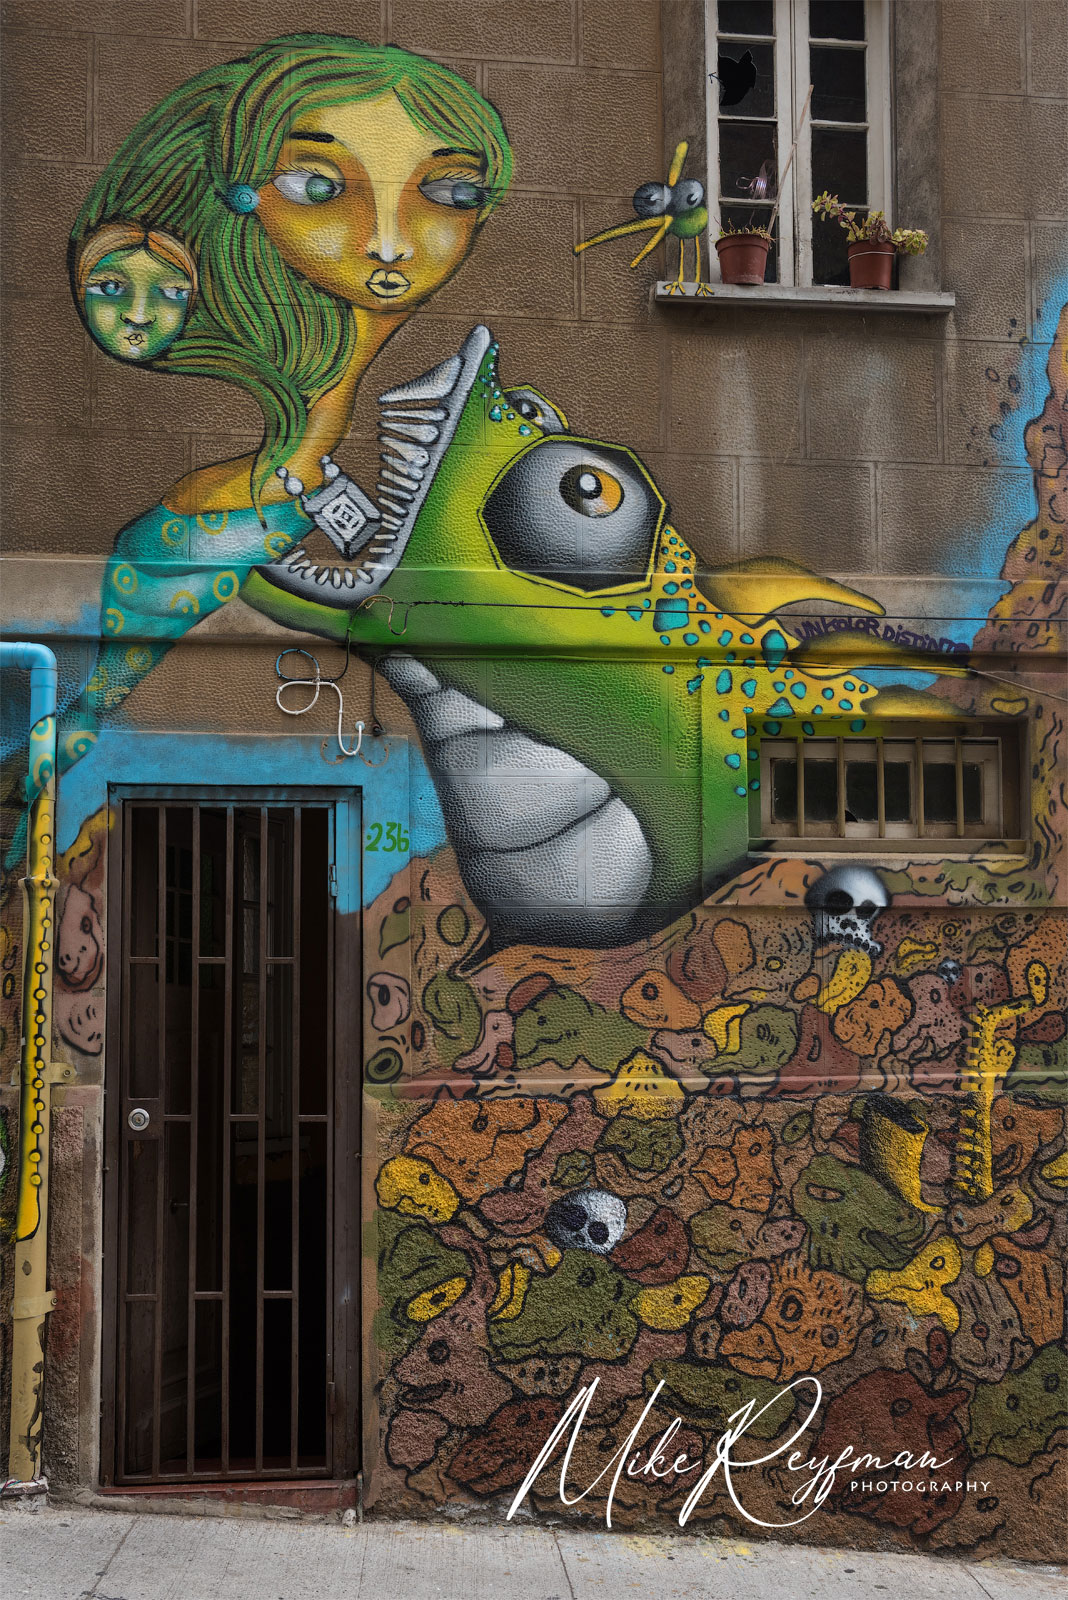 Valparaiso, Chile. The Graffiti Capital of the World 065-VP _D1D0123 - Valparaiso, Chile. The Graffiti Capital of the World - Mike Reyfman Photography